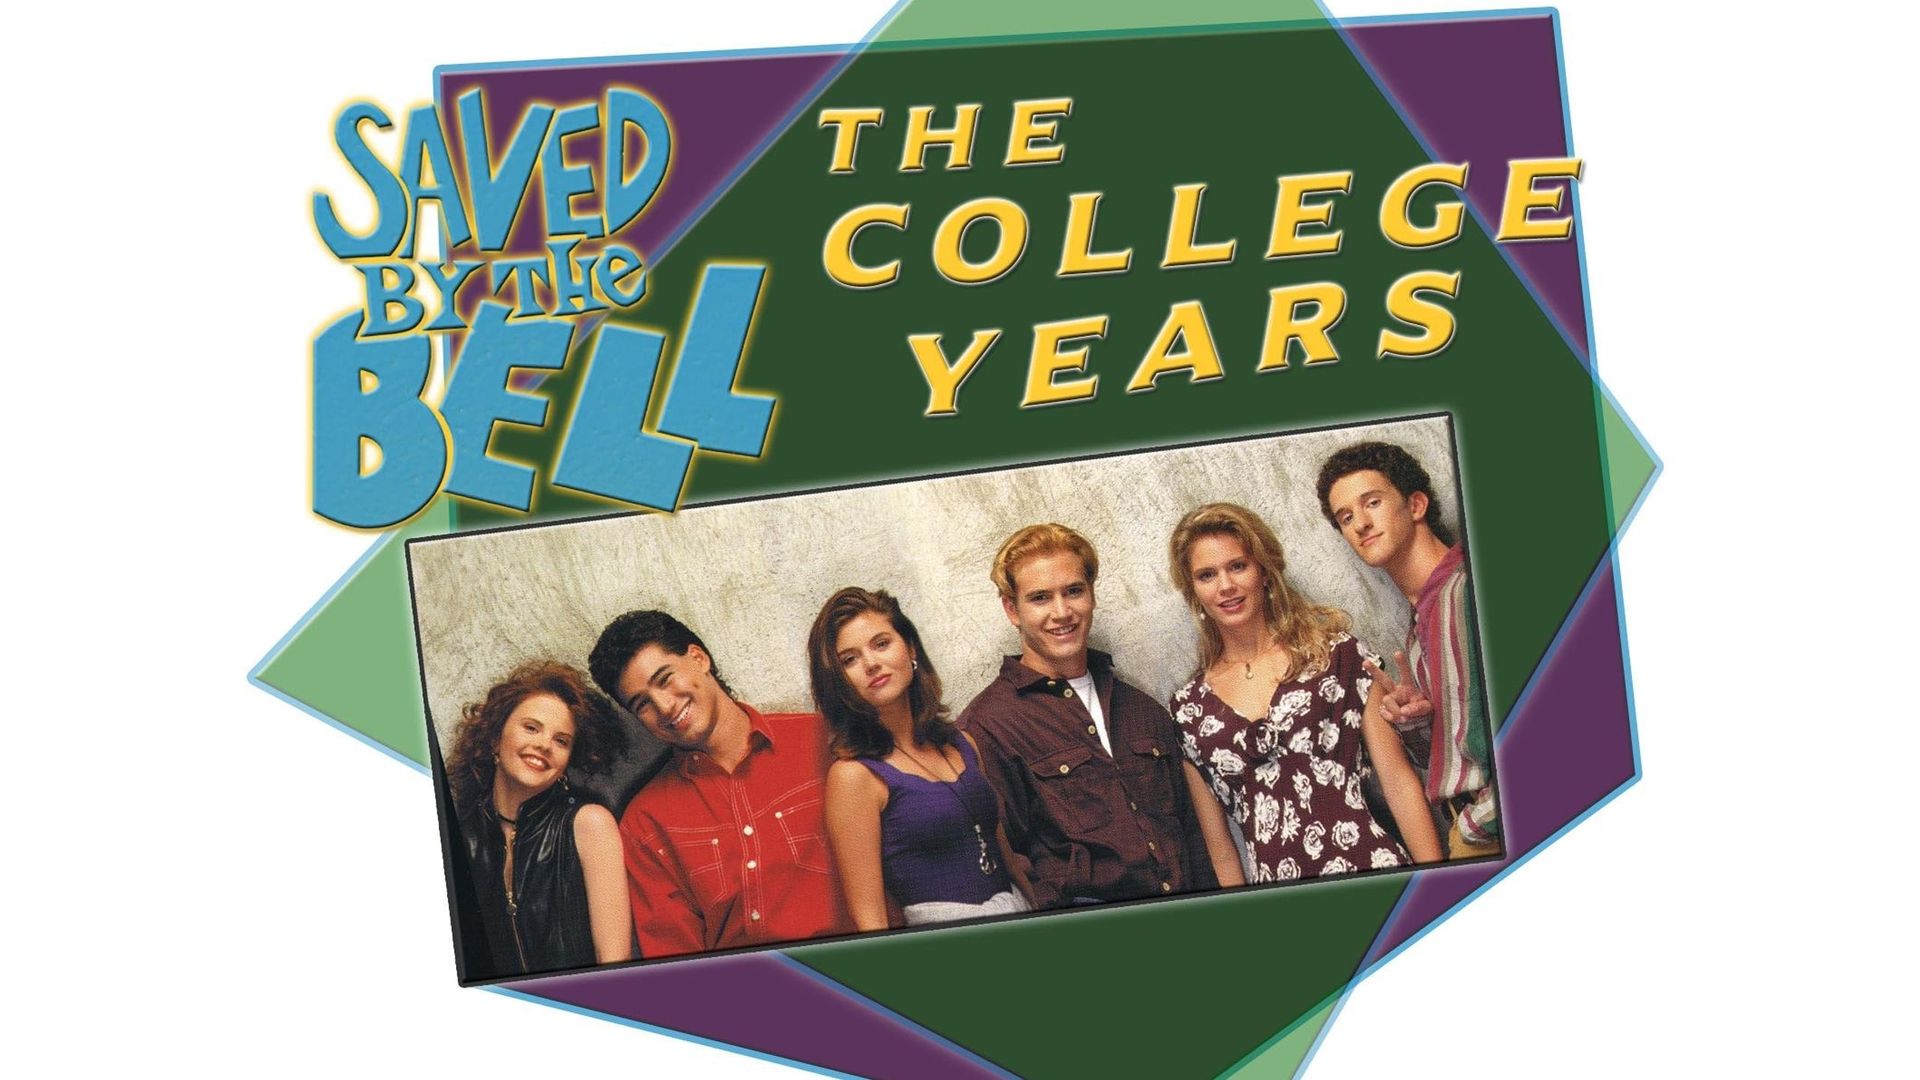 Saved by the Bell: The College Years background